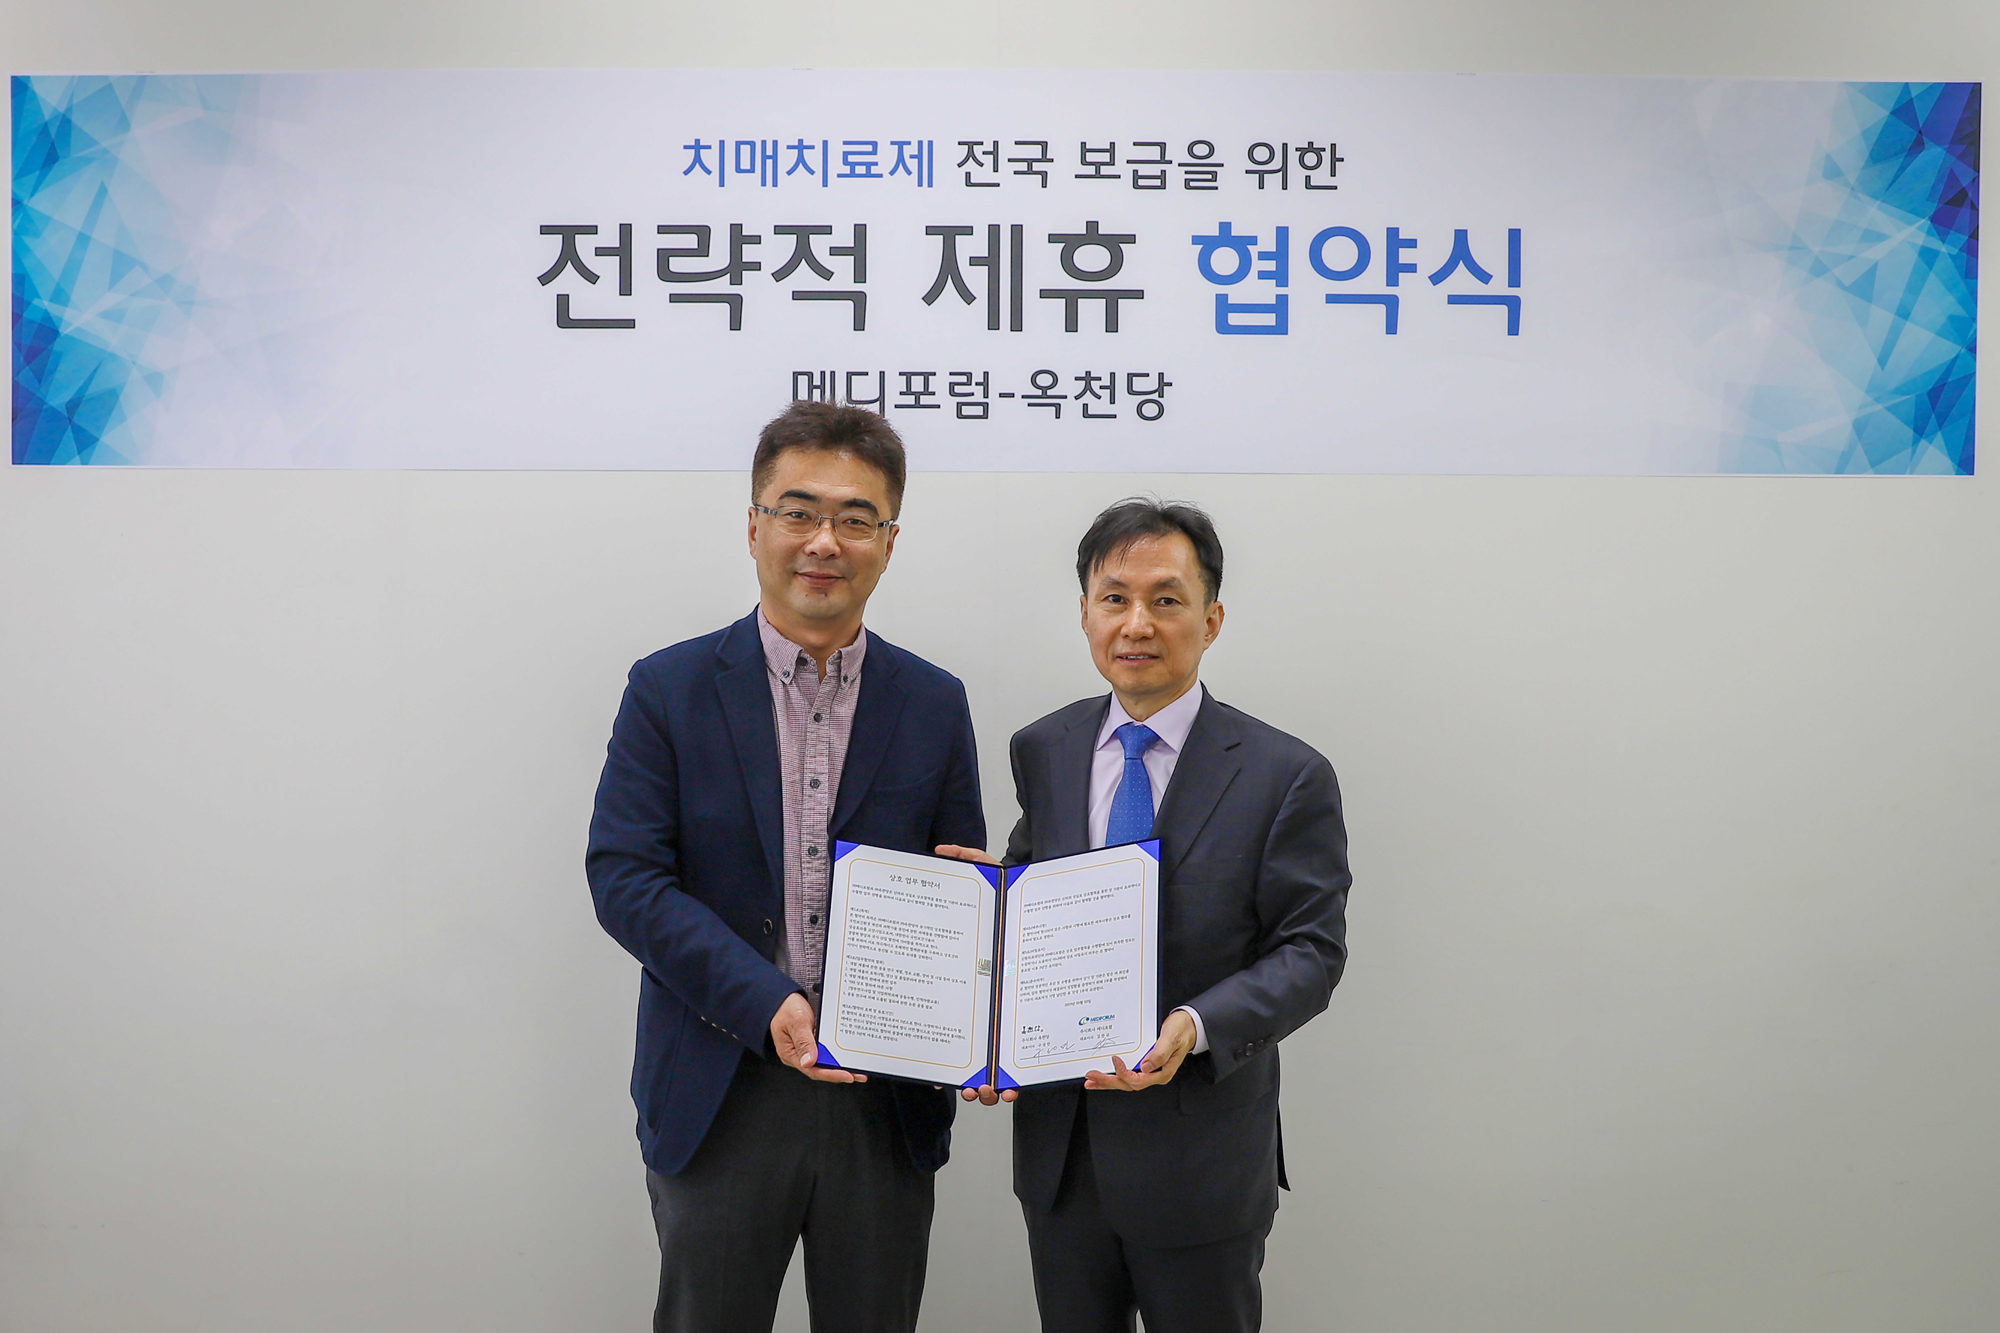 Okchundang signed a strategic alliance for the use of PM012, a Chinese medicine-based treatment for